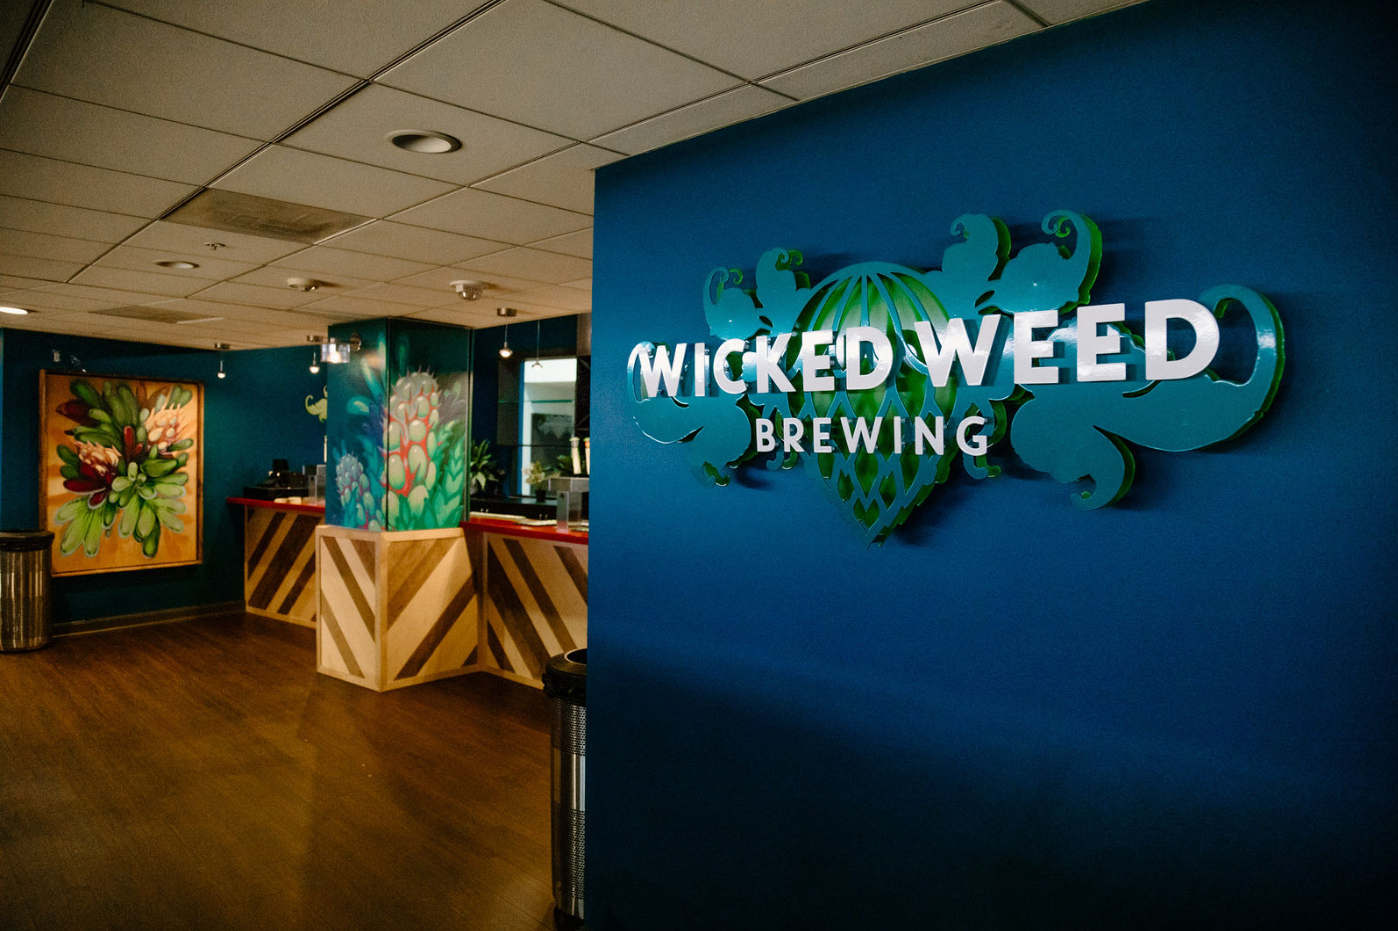 Bon Secours Wellness Arena announces new partnership with Wicked Weed Brewing